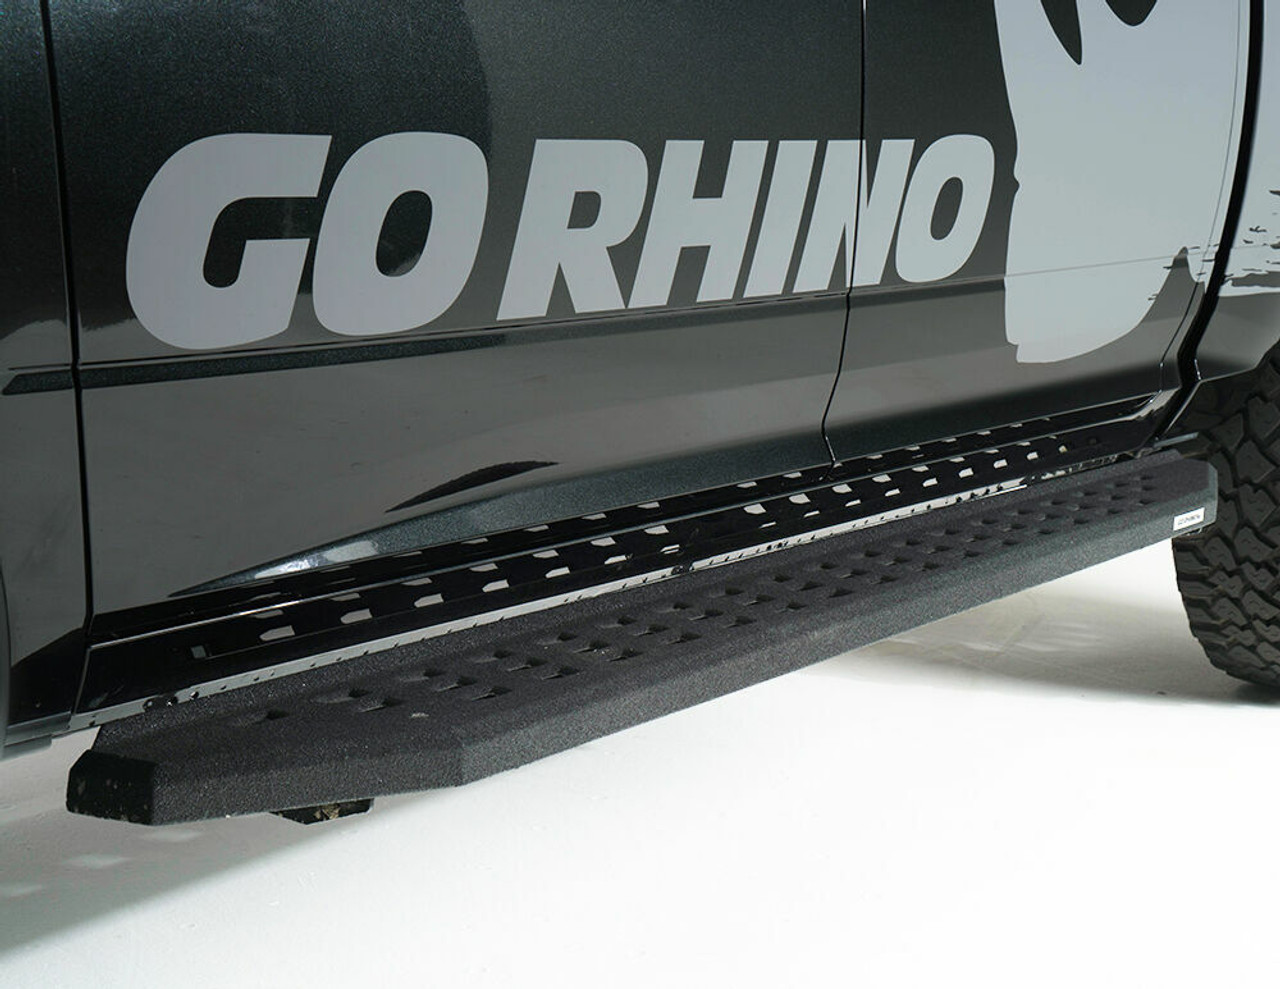 Go Rhino 69417680PC Ford, F-250, F-350, 1999 - 2016, RB20 Running boards - Complete Kit: RB20 Running boards + Brackets, Galvanized Steel, Textured black, 69400080PC RB20 + 6941765 RB Brackets